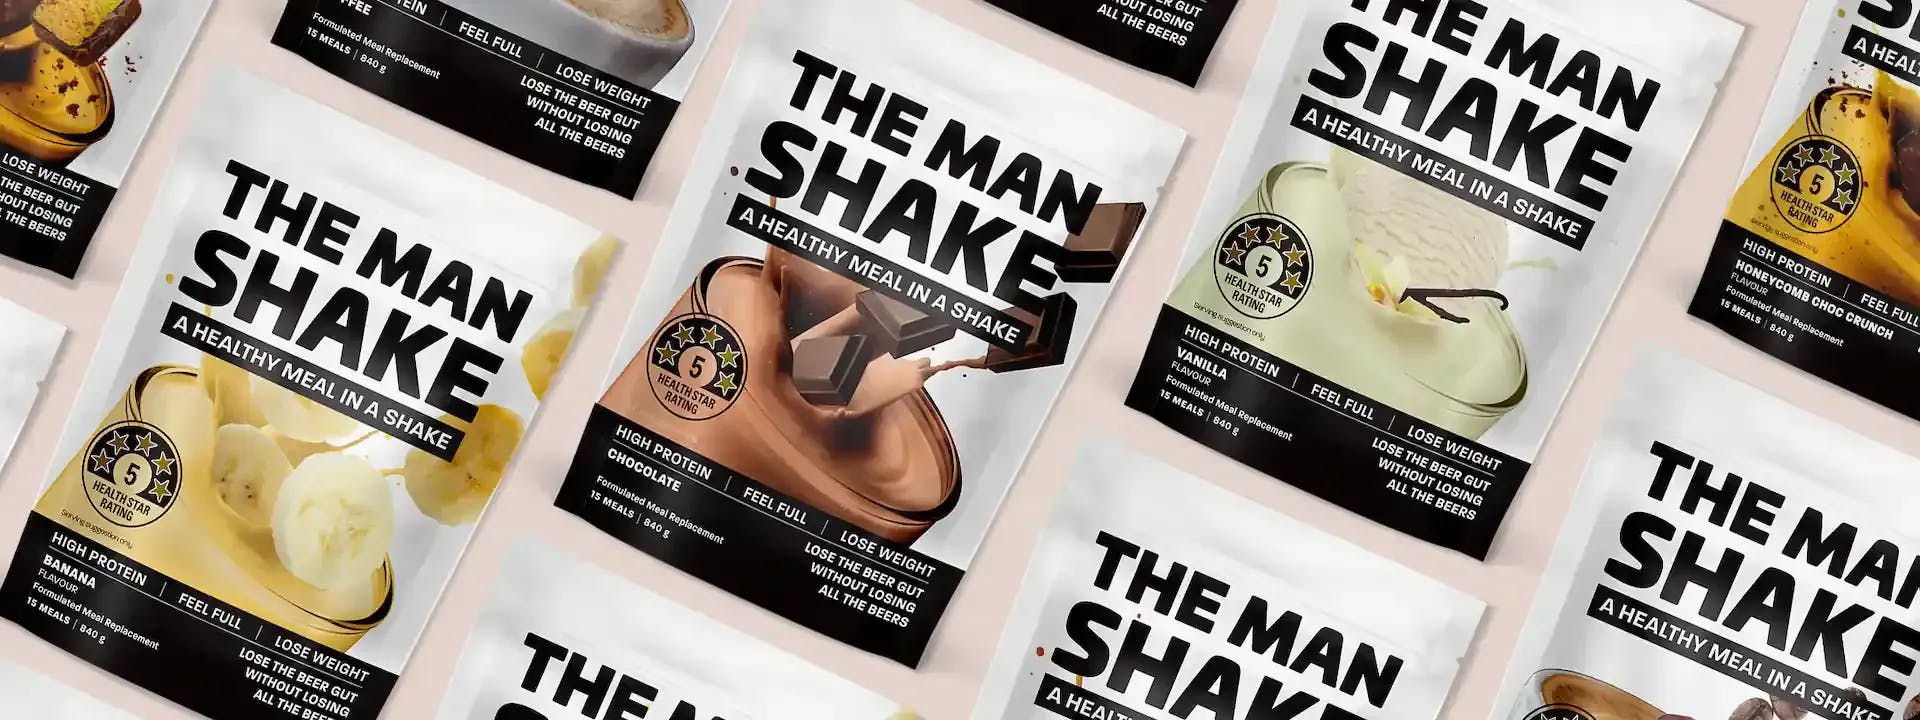 Where To Buy The Man Shake In NZ